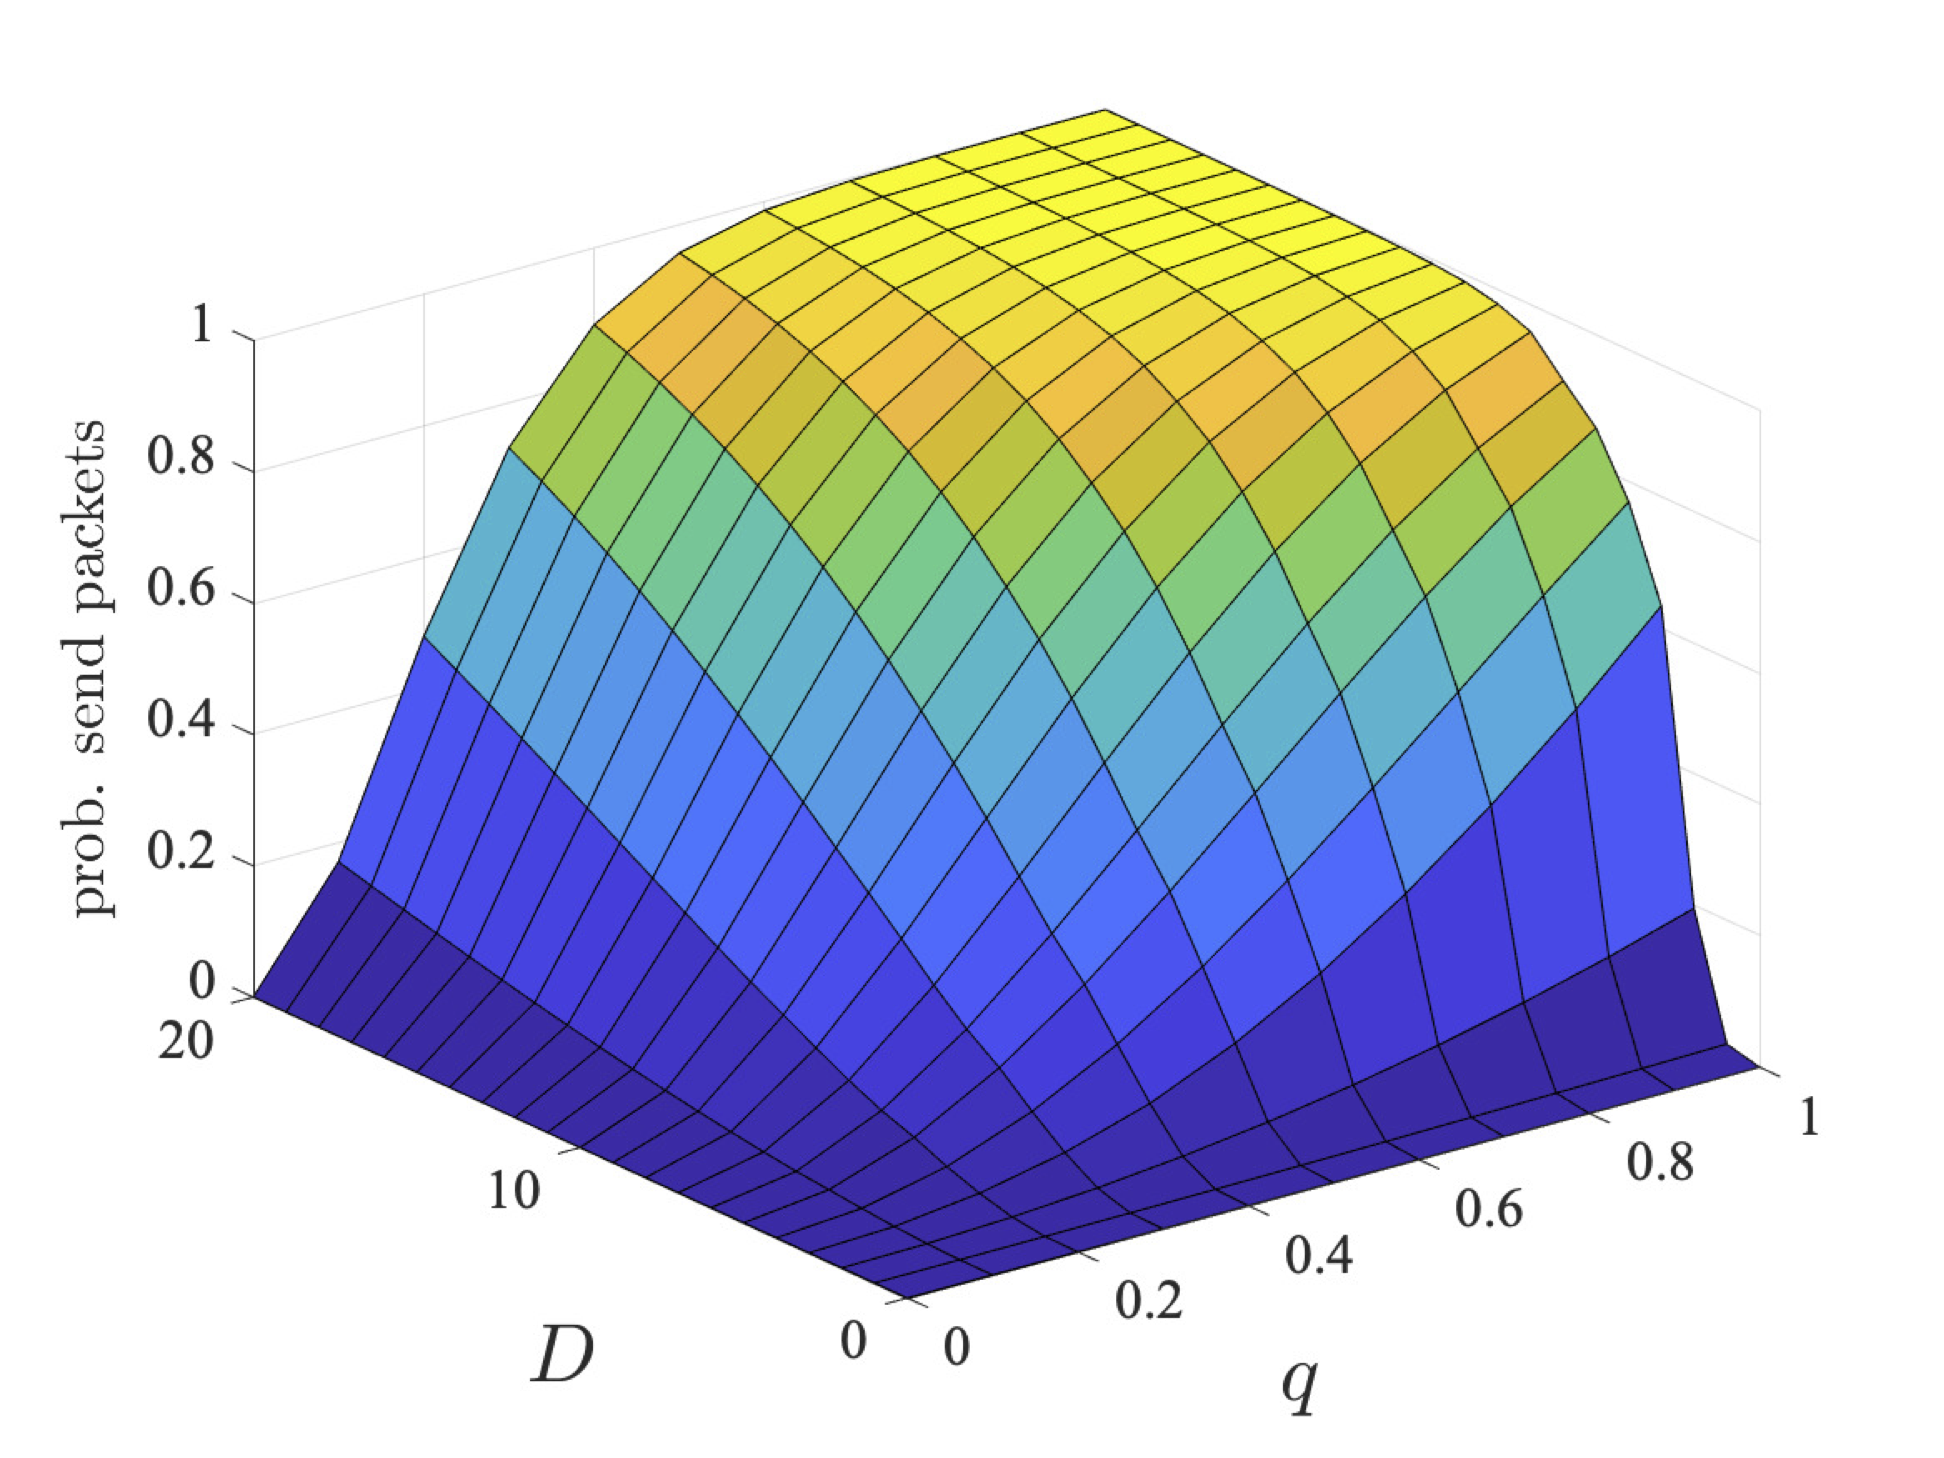 plot: maximum probability users 2 and 3 can ensure they send their packets within a deadline (bcmax=2)